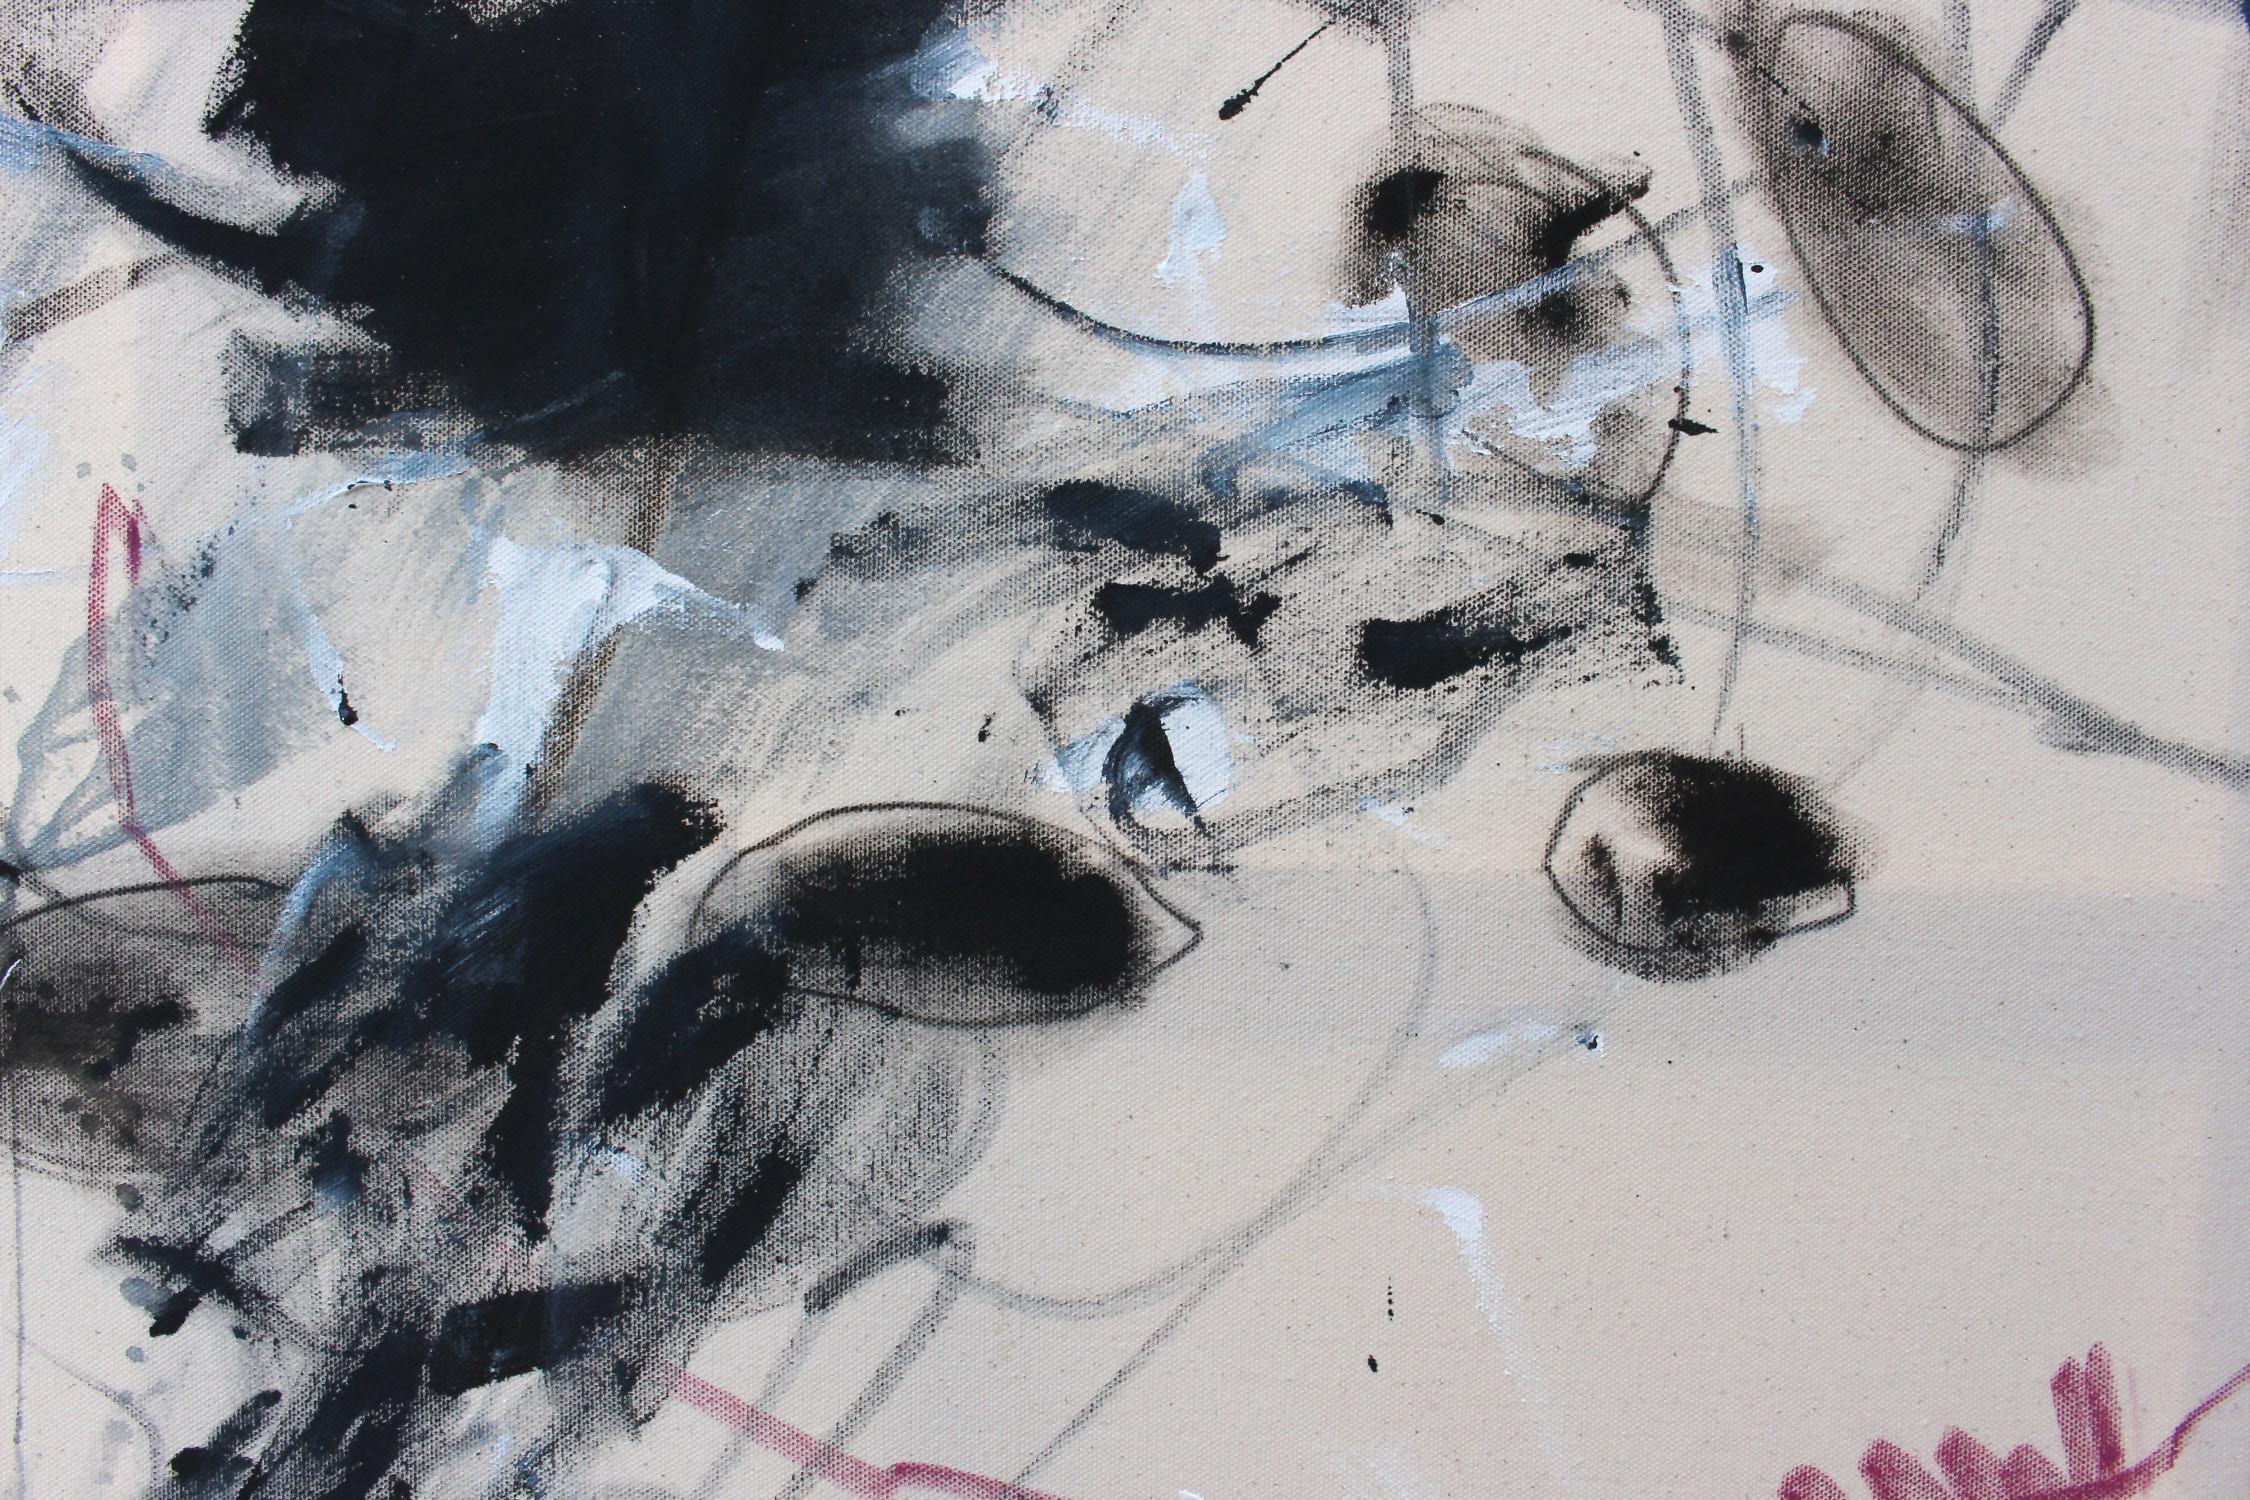 Unwritten letters (Abstract painting) - Gray Abstract Painting by Daniela Schweinsberg